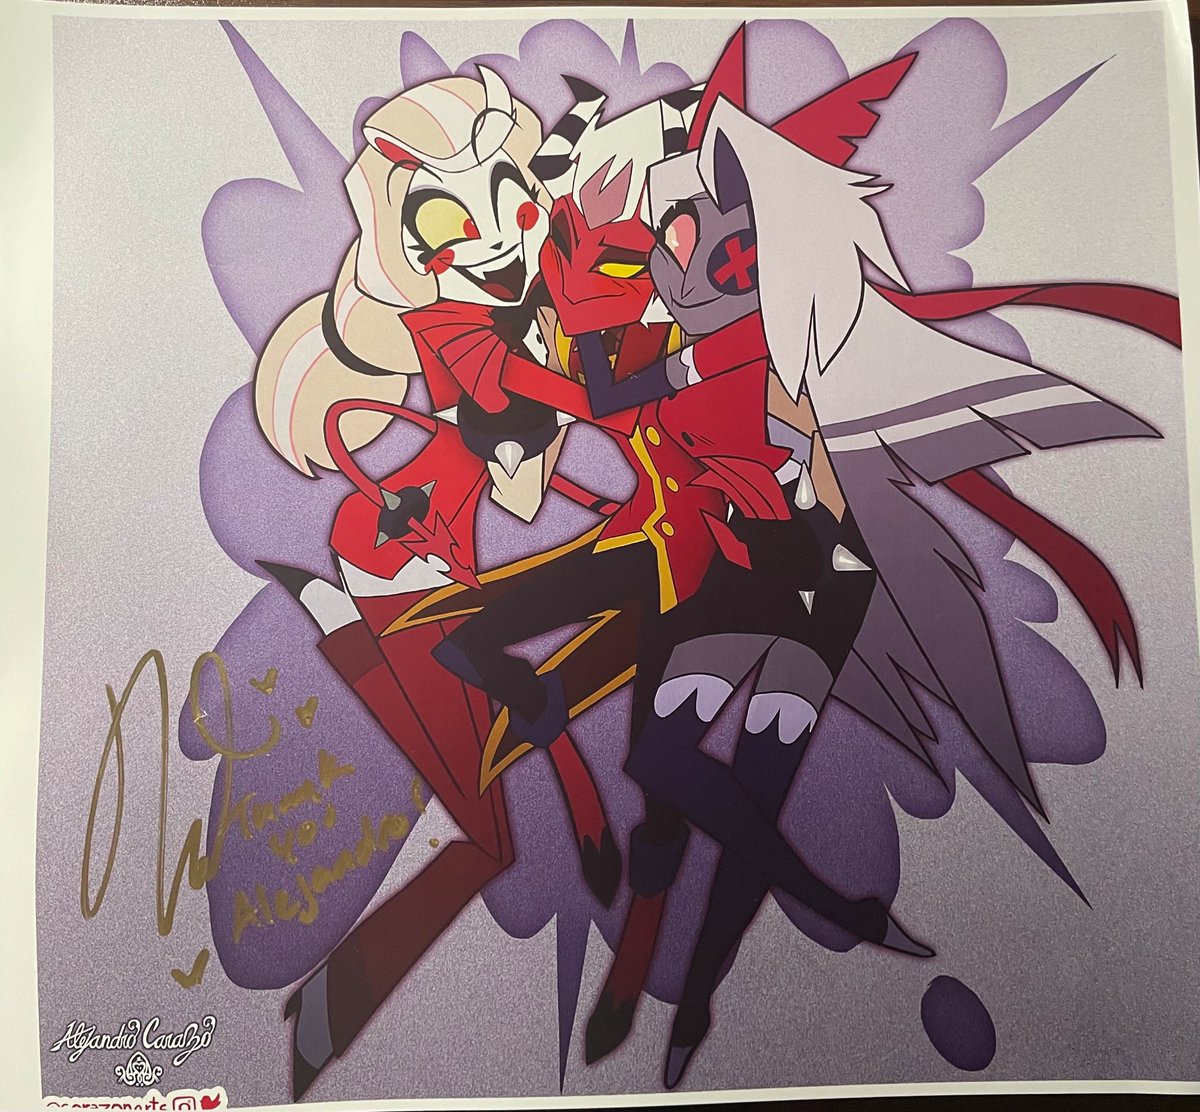 Finally! #MEGACONOrlando2024 is over! And I got signatures from @VivziePop , @RichardHorvitz , and Brandon Rogers!! 
It was great meeting you all for the first time! Wish you luck and love in all that you do!
#HelluvaBoss #Blitzo #HazbinHotel #chaggie 
#moxxie #angeldust